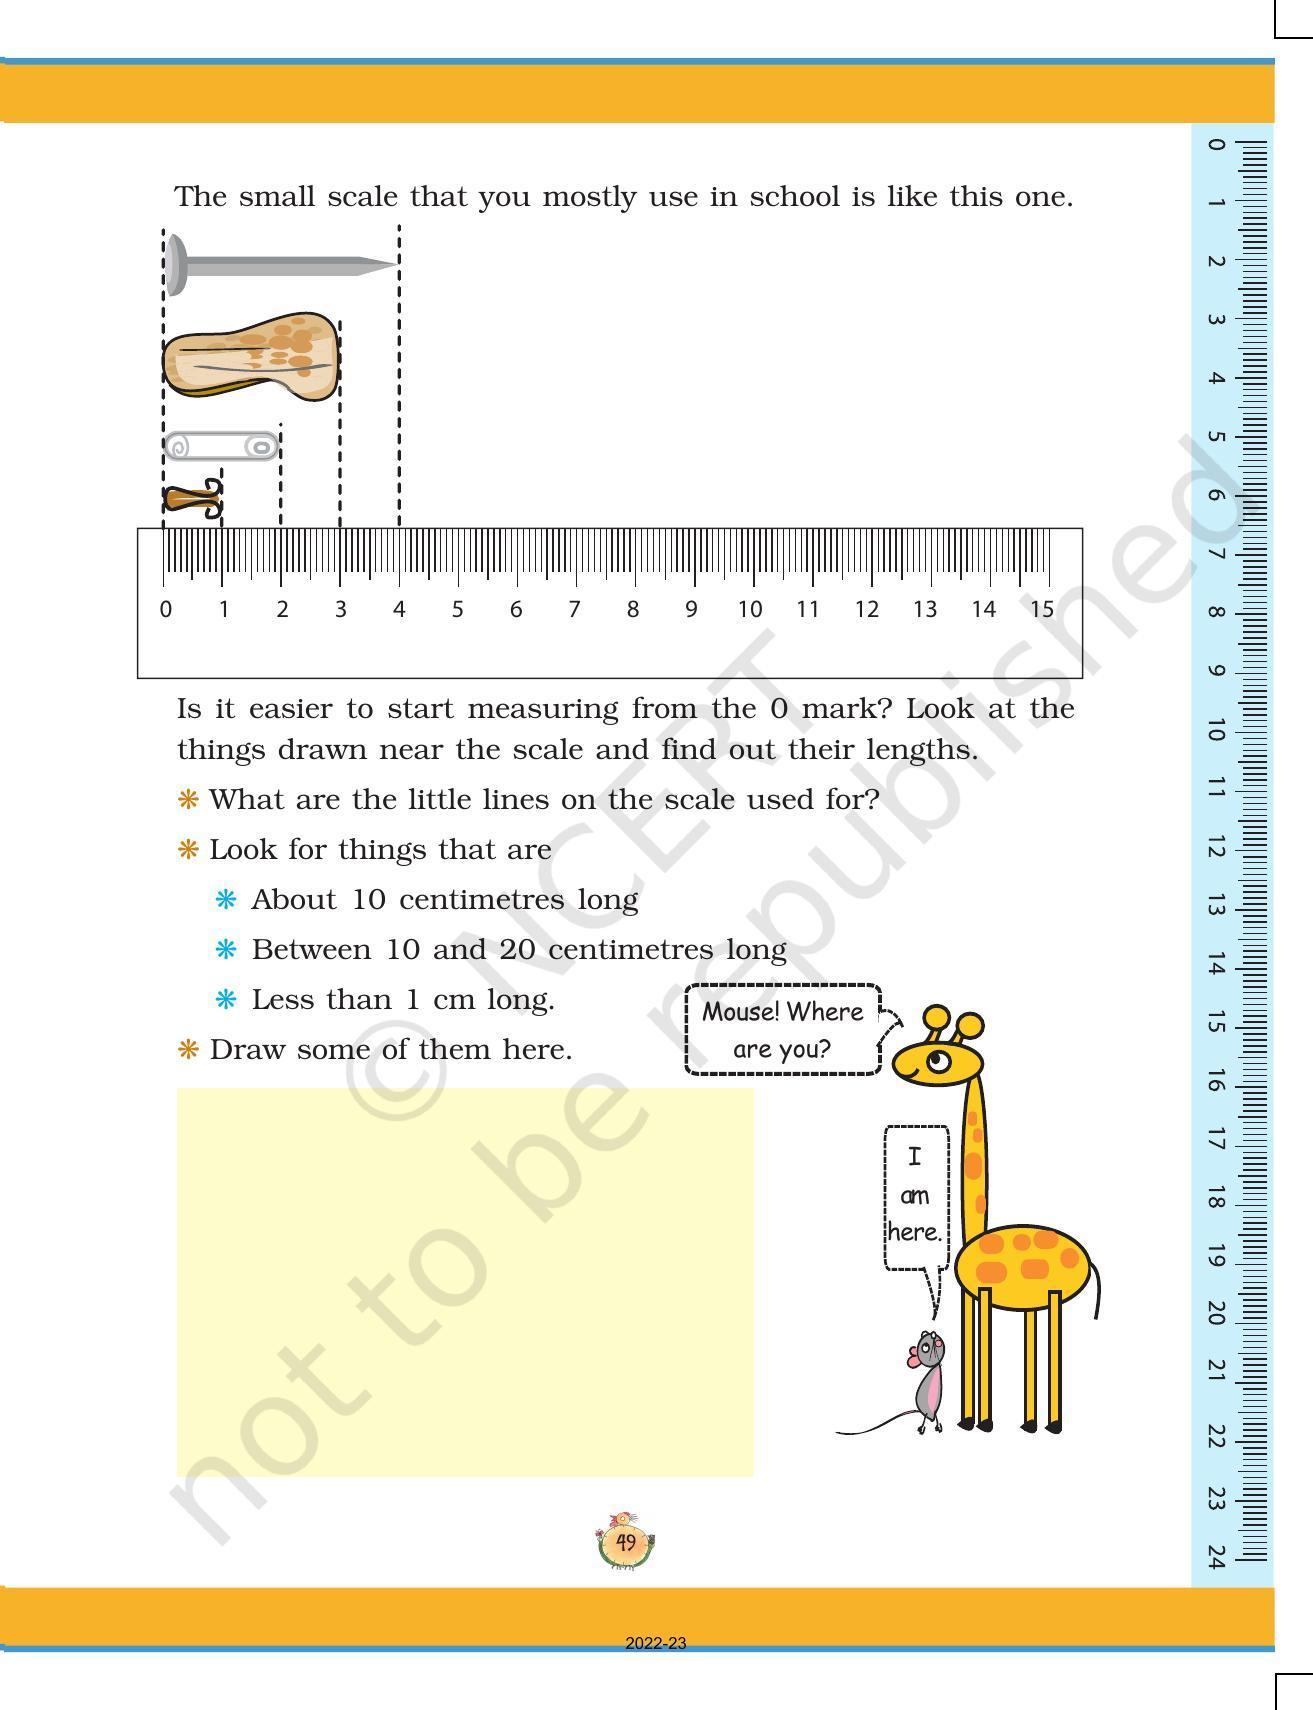 NCERT Book for Class 3 Maths Chapter 4-Long and Short - Page 4